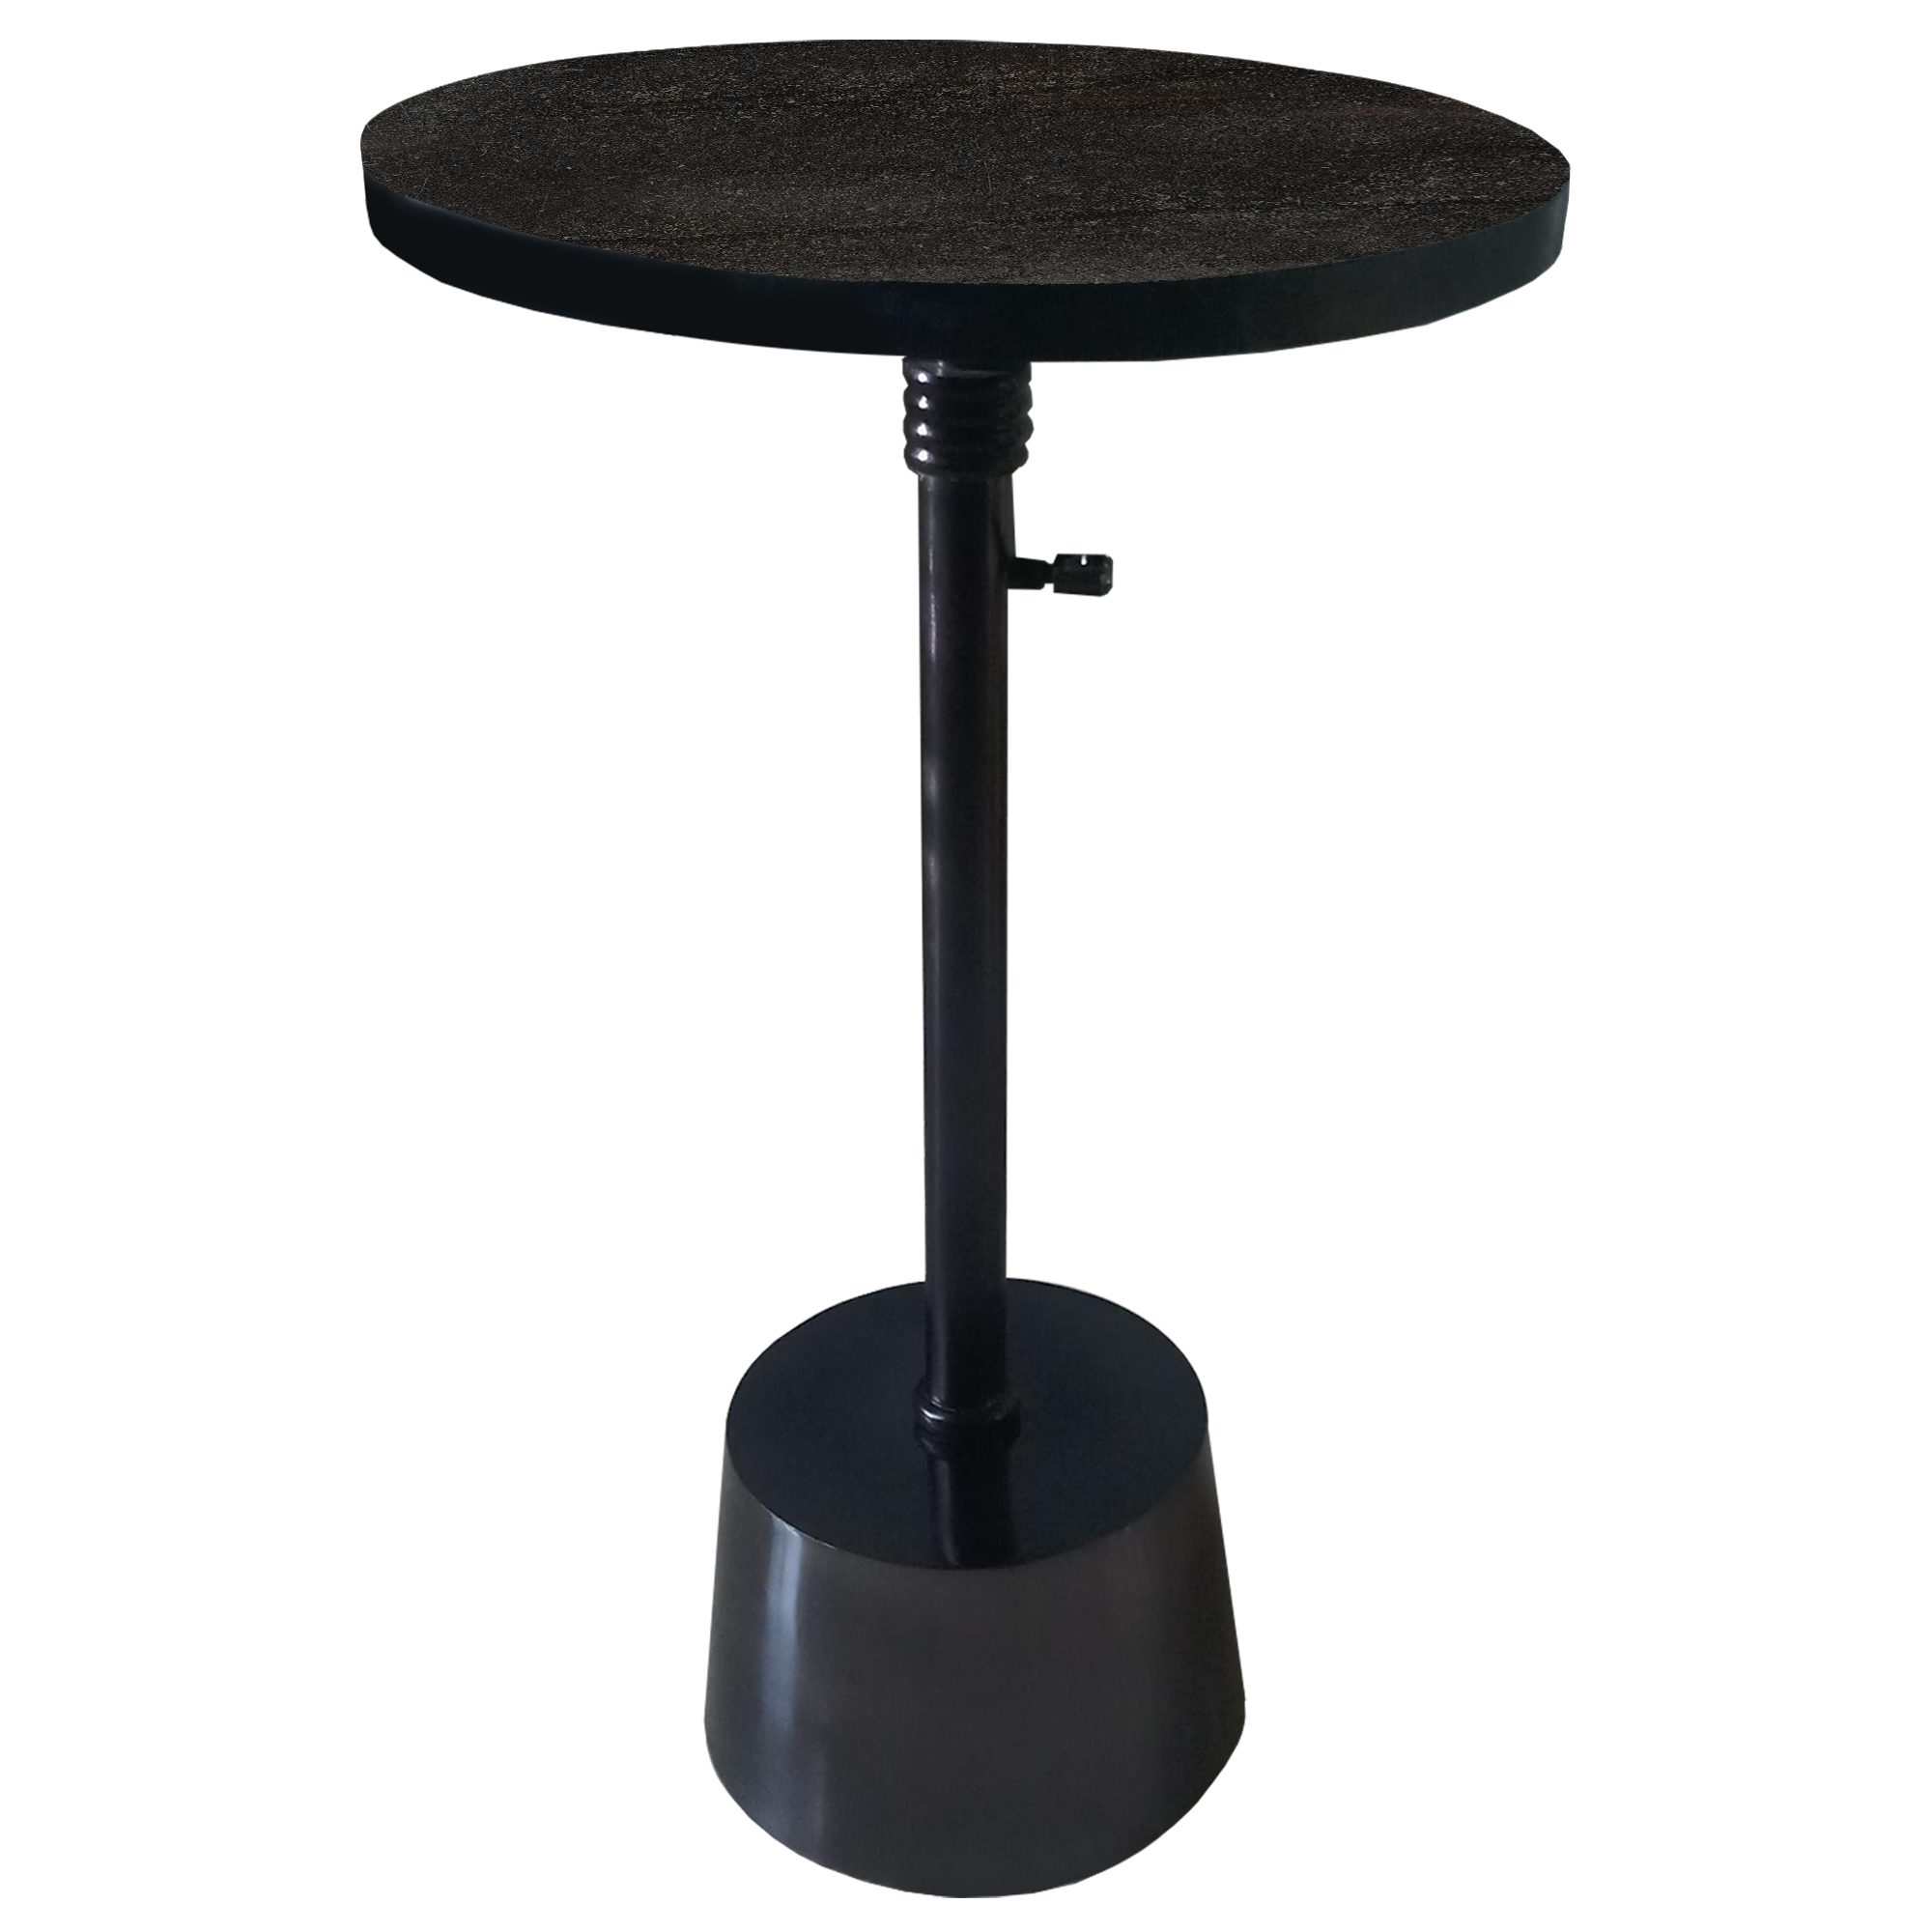 Aluminum Frame Round Side Table With Marble Top And Adjustable Height, Black- Saltoro Sherpi